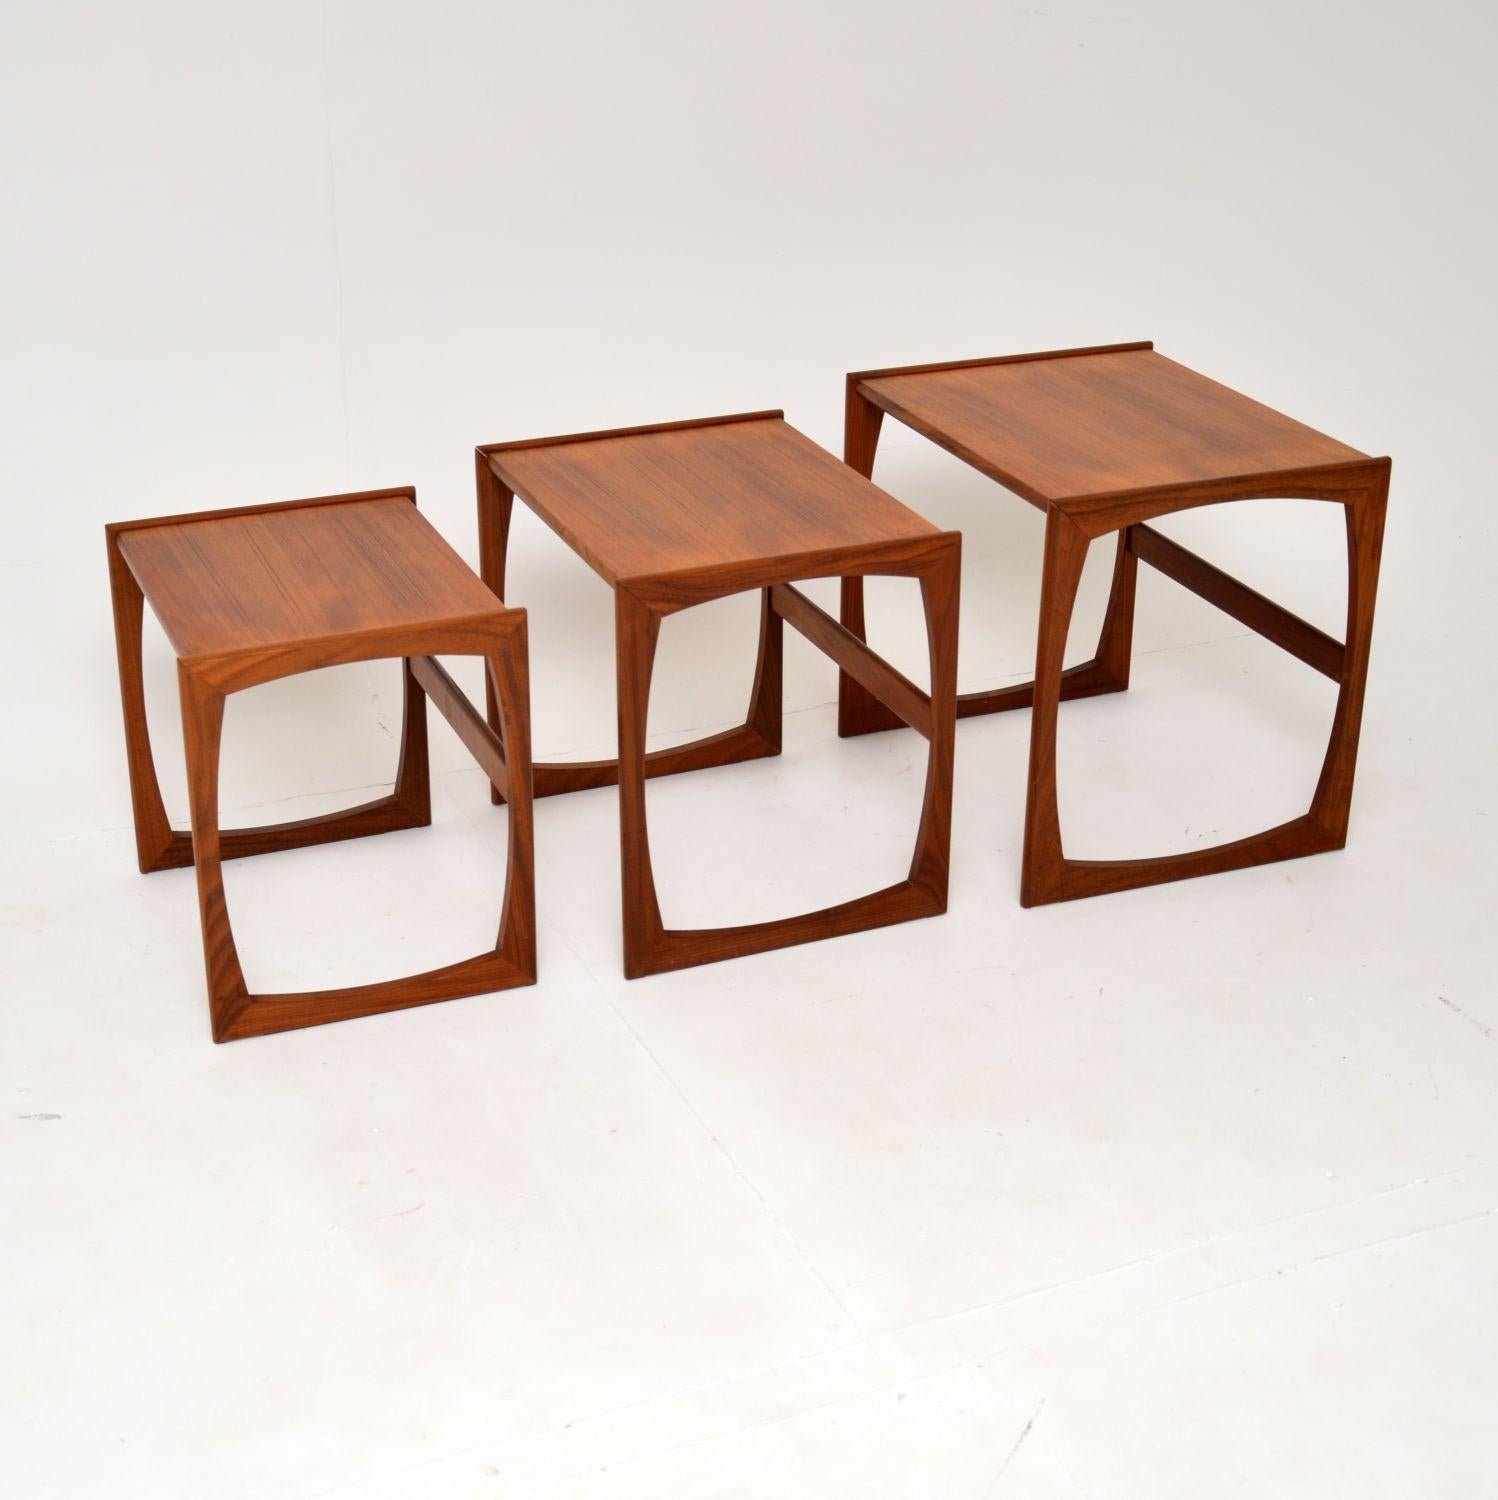 A stunning and iconic design, these teak nesting tables were made by G Plan. This model is from the Quadrille range, they were made in England and date from the 1960’s.

The quality is amazing and these have a very clever design. They have